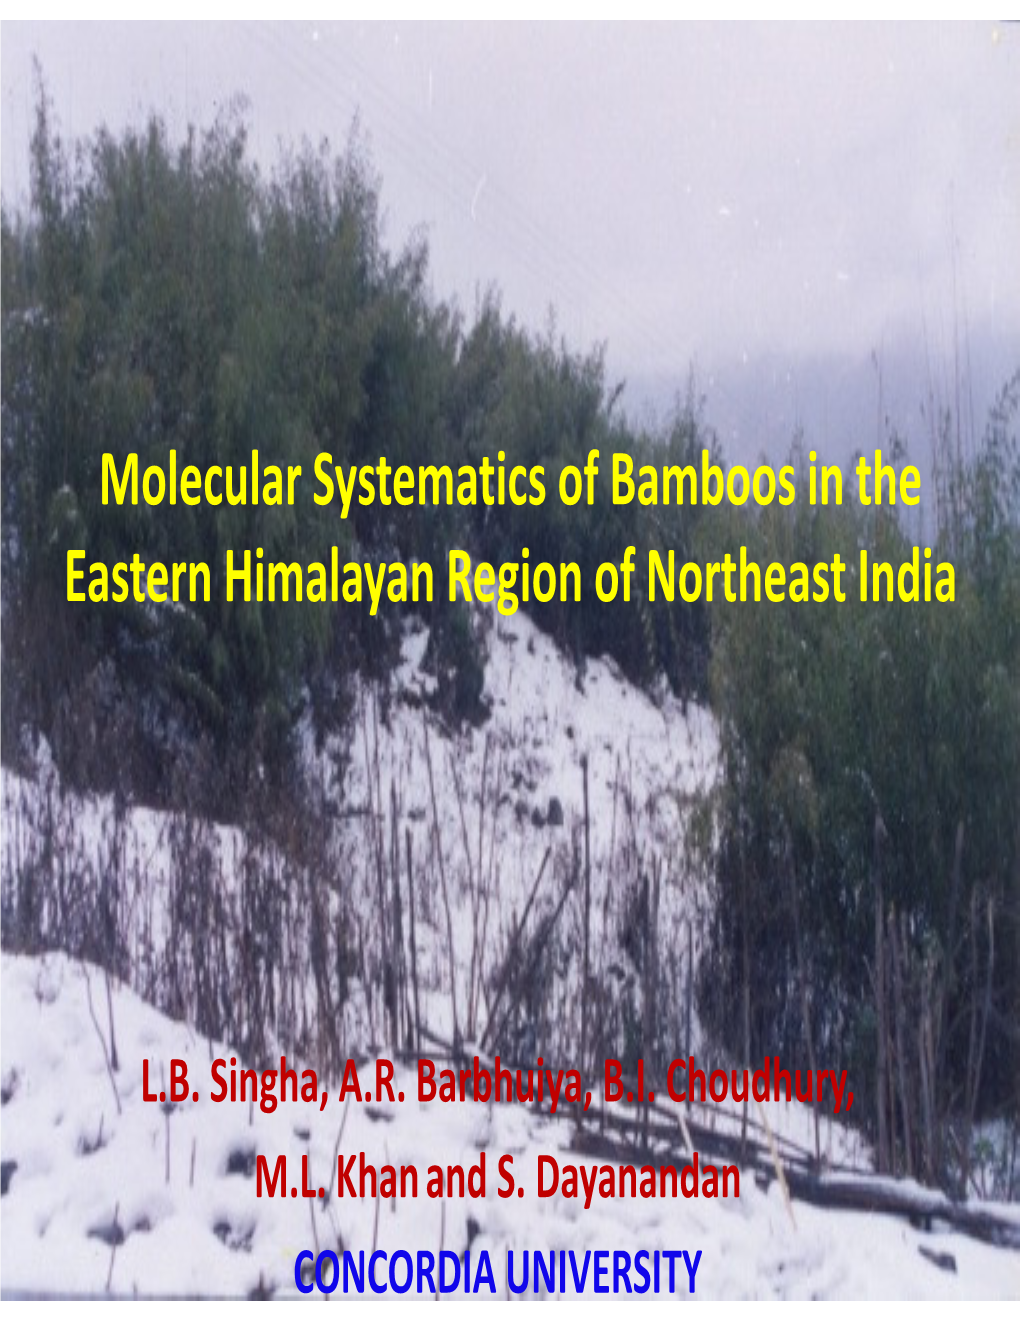 Molecular Systematics of Bamboos in the Eastern Himalayan Region of Northeast India